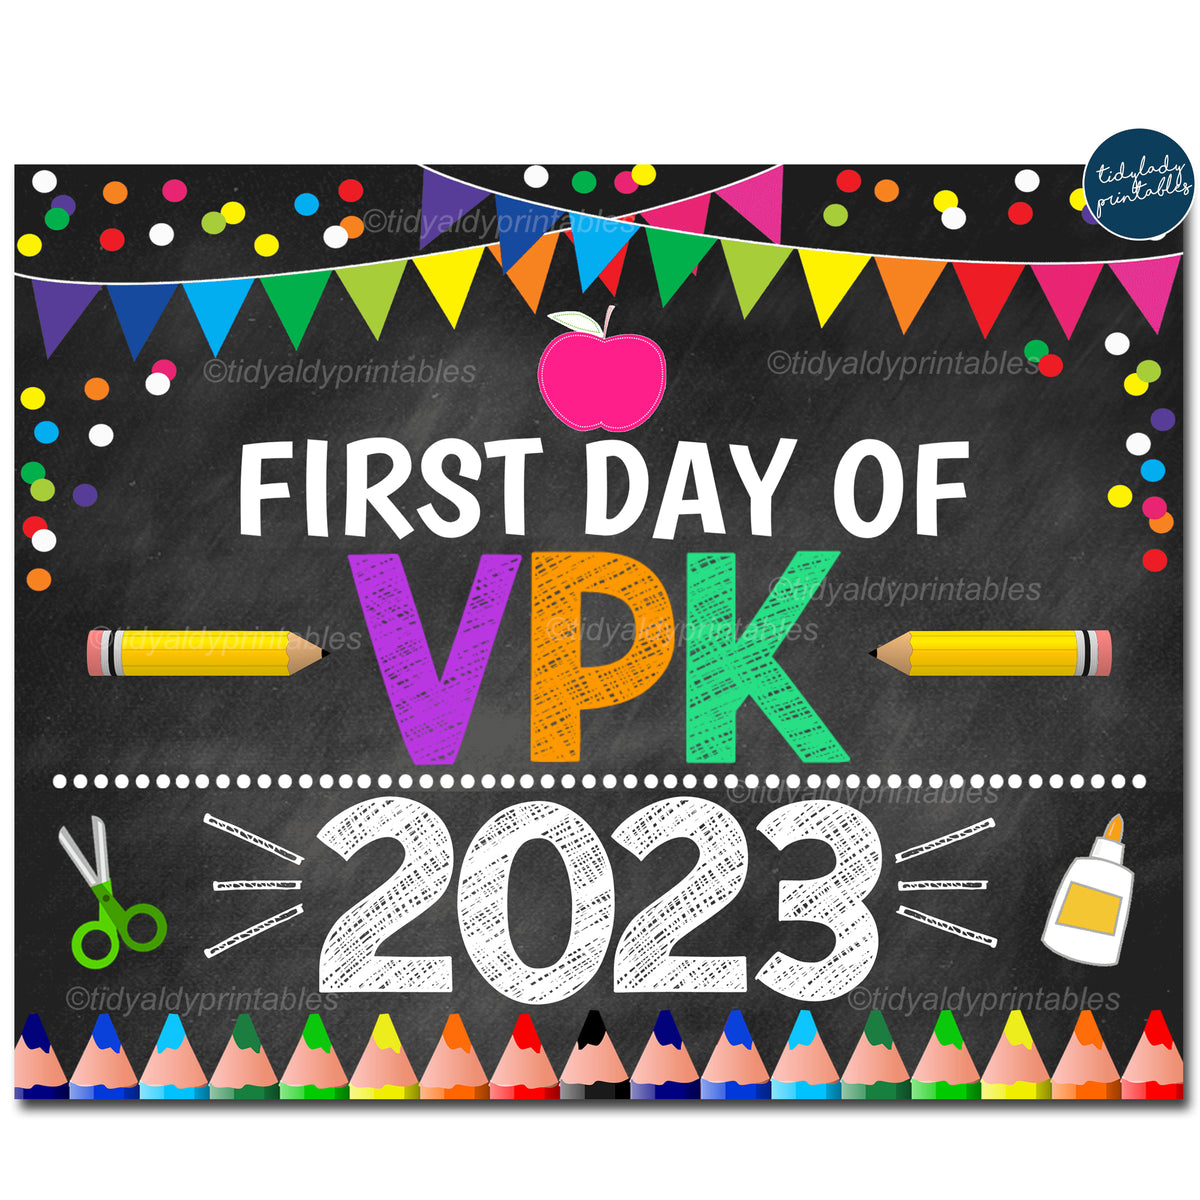 first-day-of-vpk-2023-school-sign-tidylady-printables